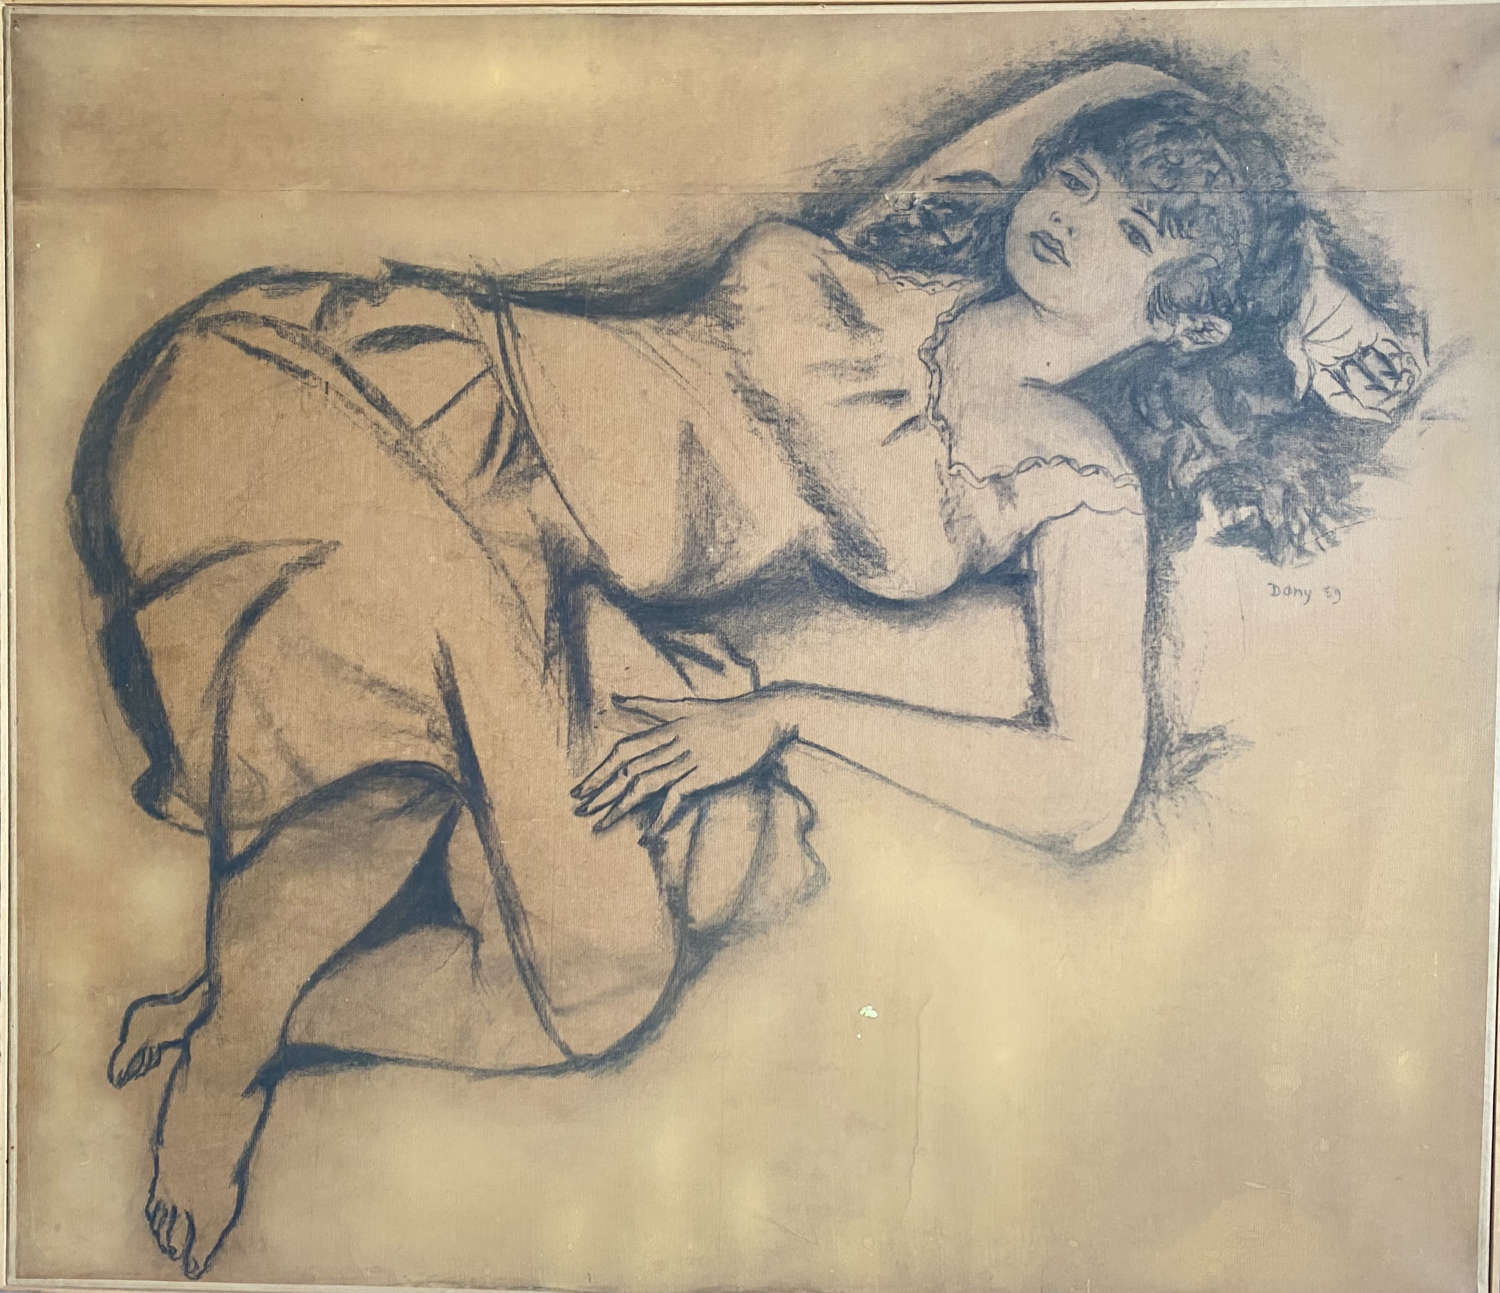 Dany: Summer Siesta 1959 Daydreaming, very large charcoal on canvas